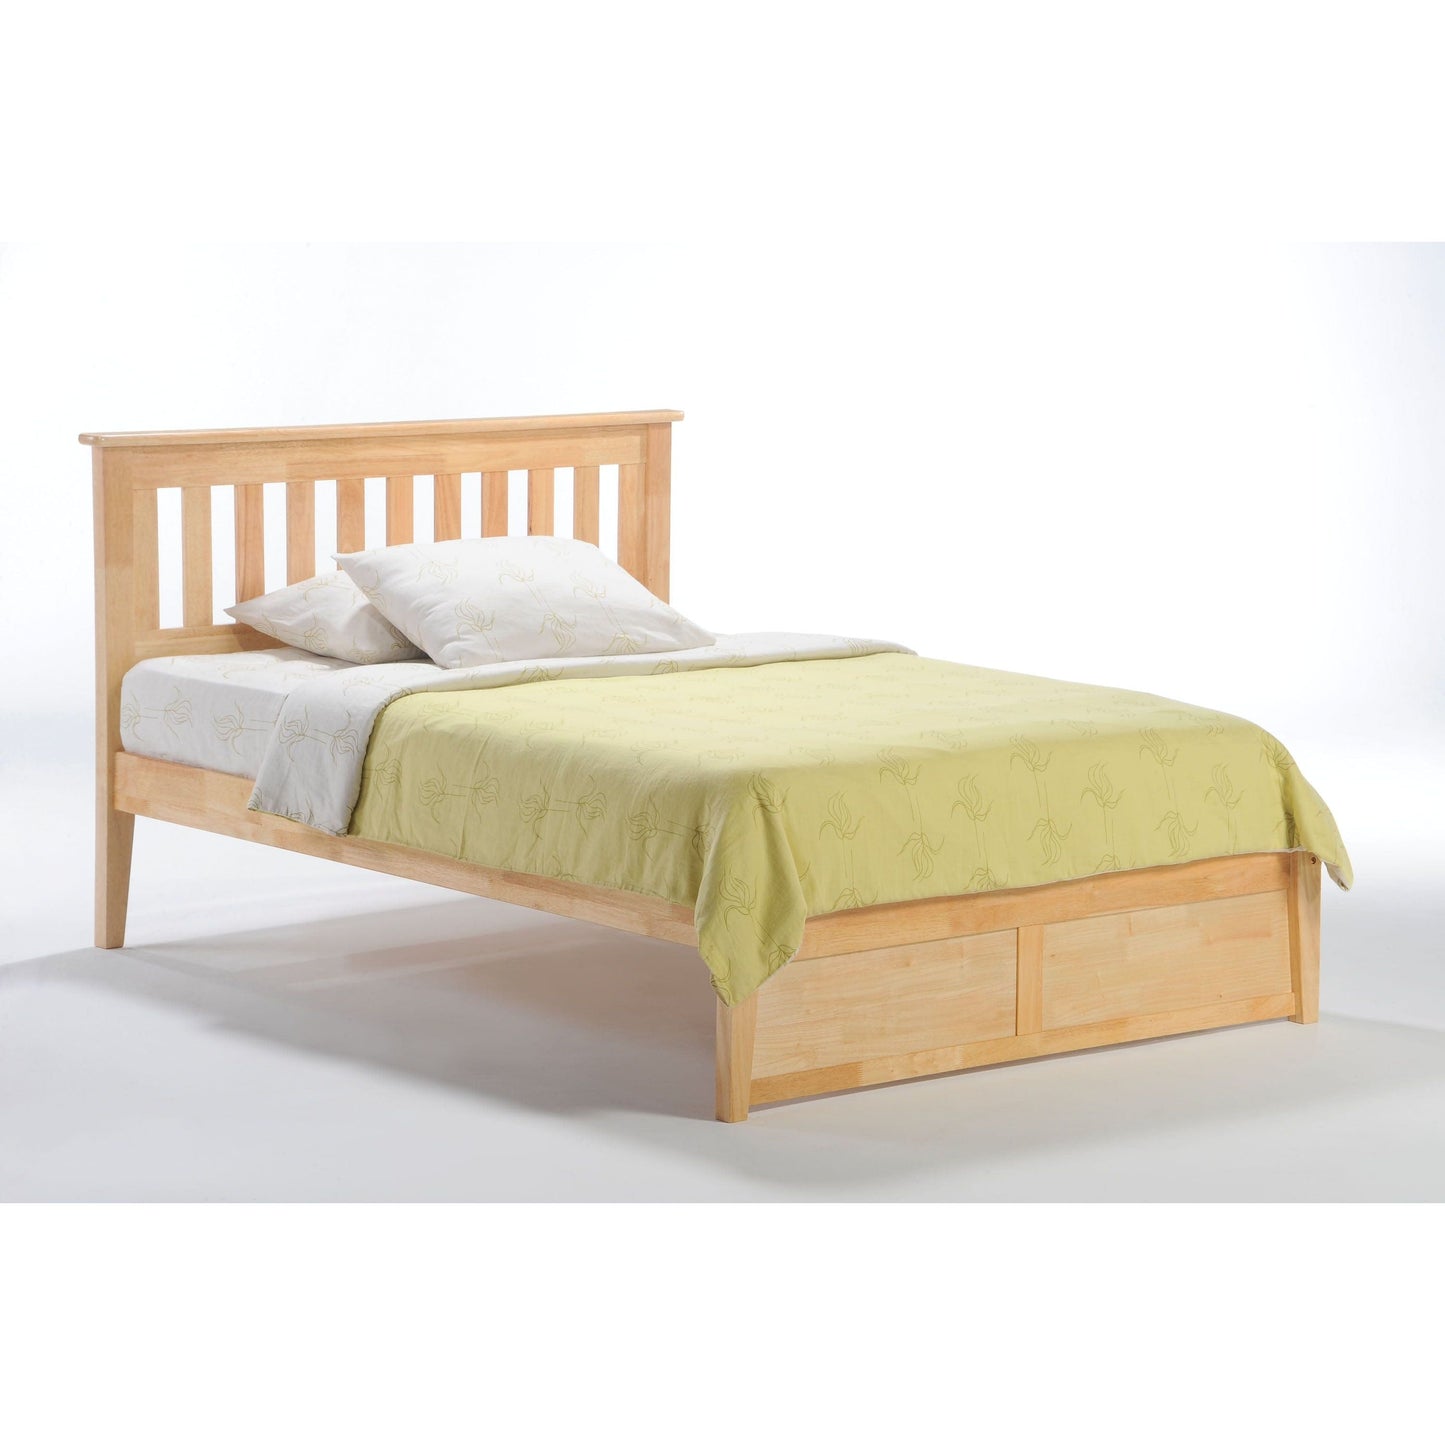 Night And Day King Rosemary Bed (P Series) in natural finish RMY-KH-EKG-COM-P-NA